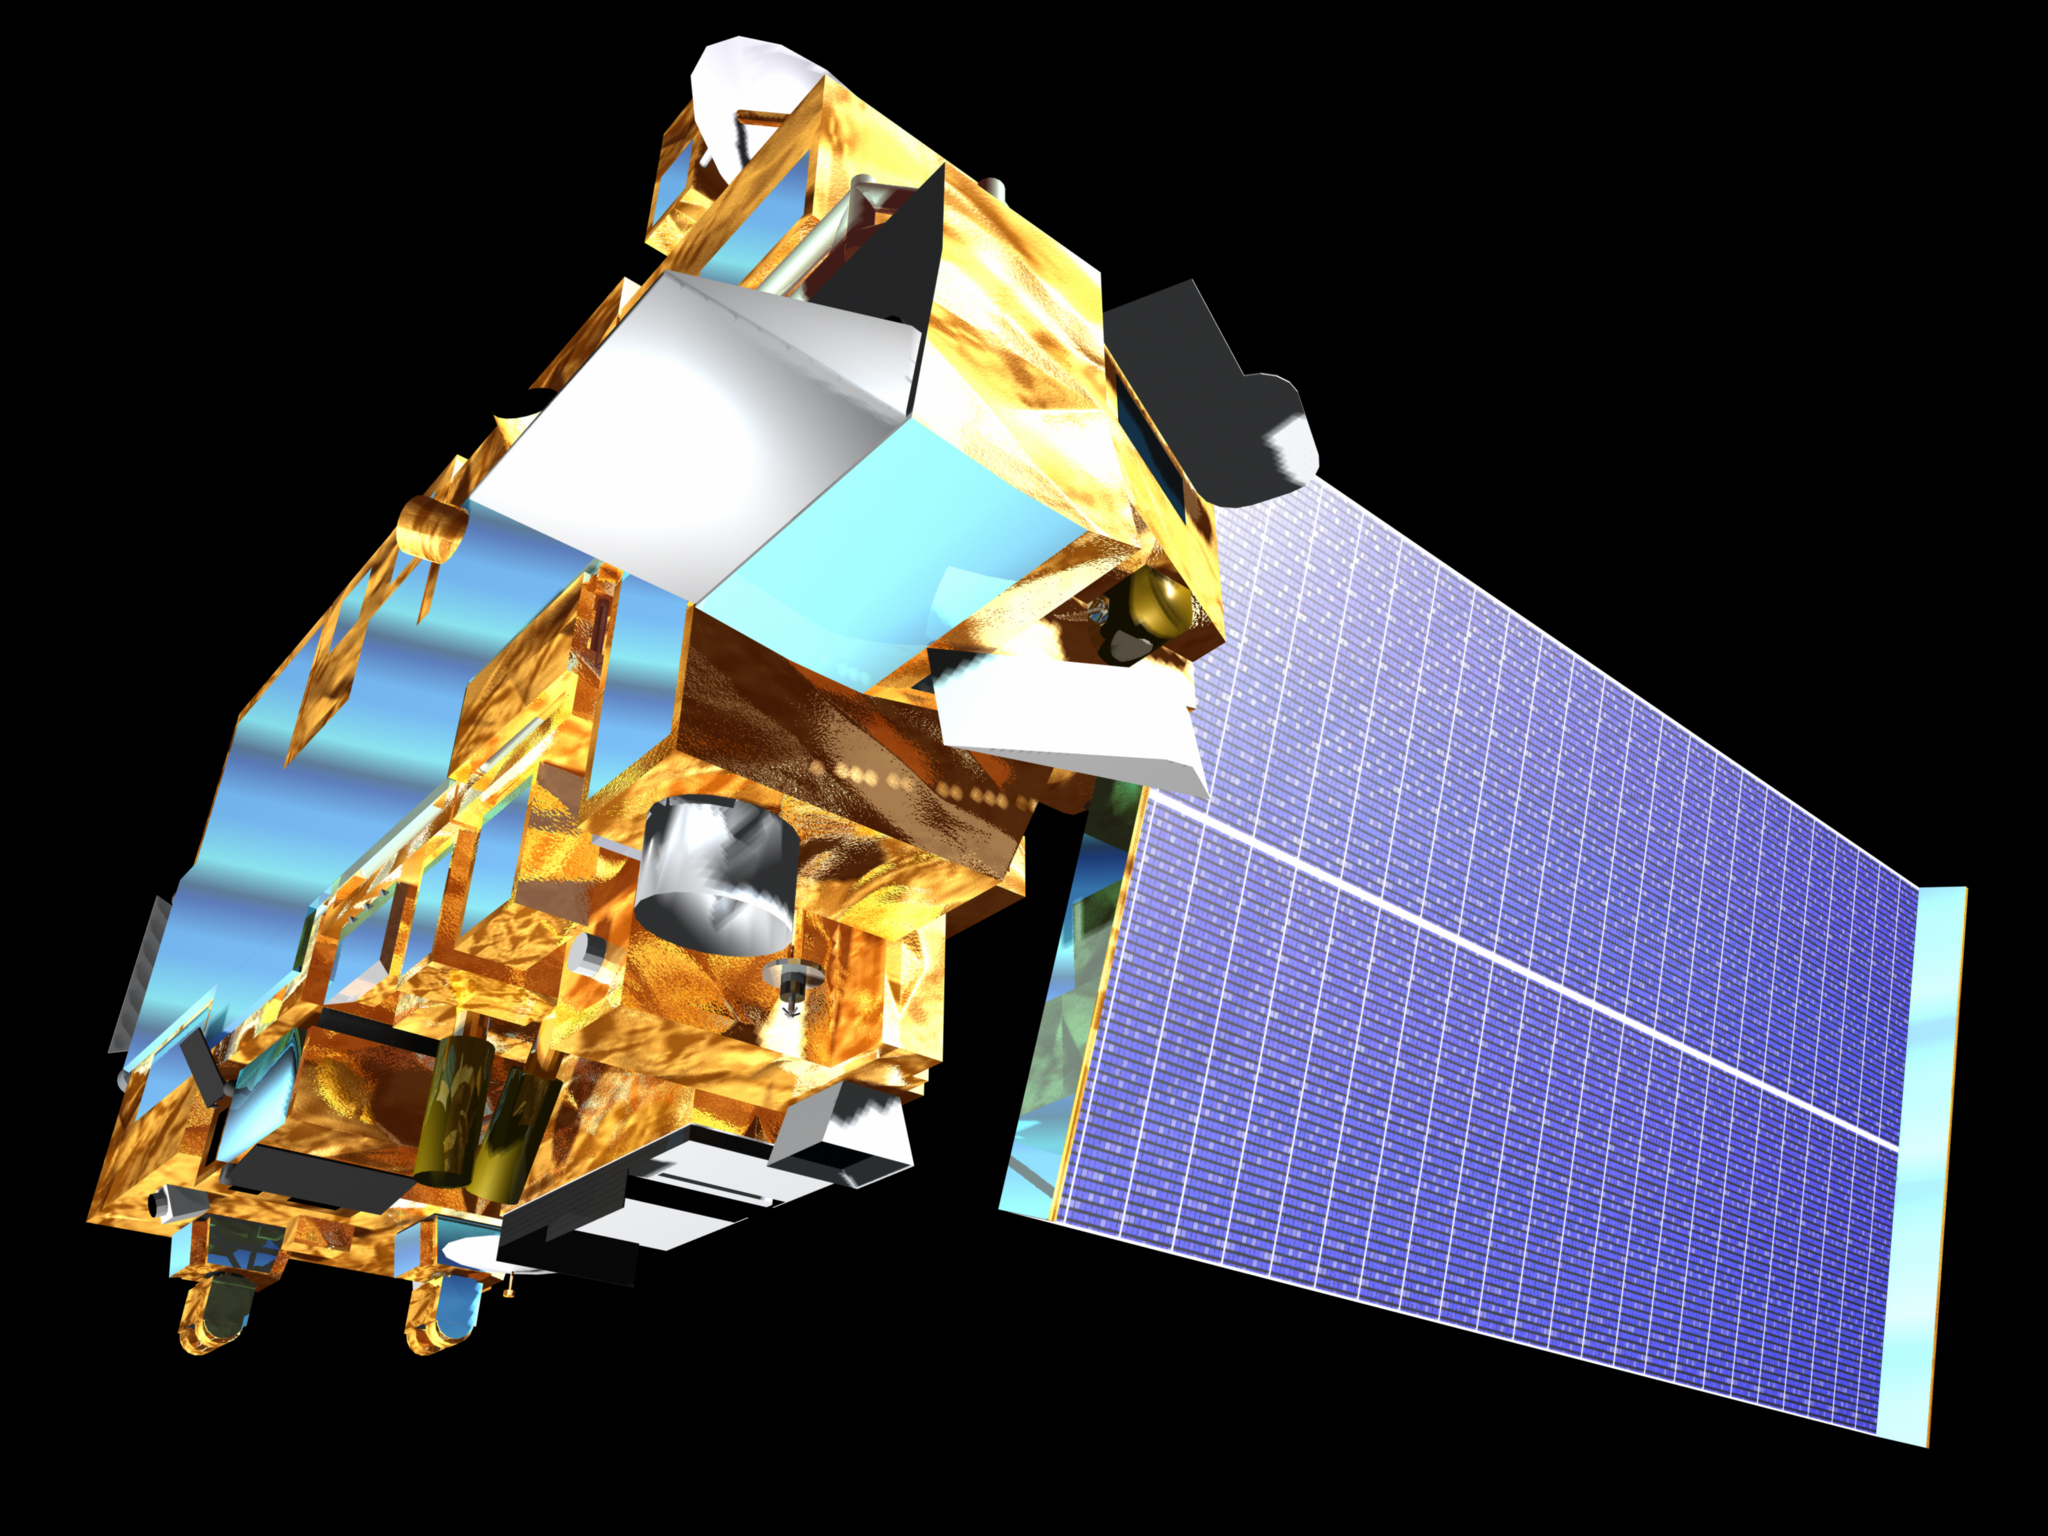 NASA's multi-instrument Terra satellite launched in 1999 carrying the Moderate Resolution Imaging Spectroradiometer (MODIS).